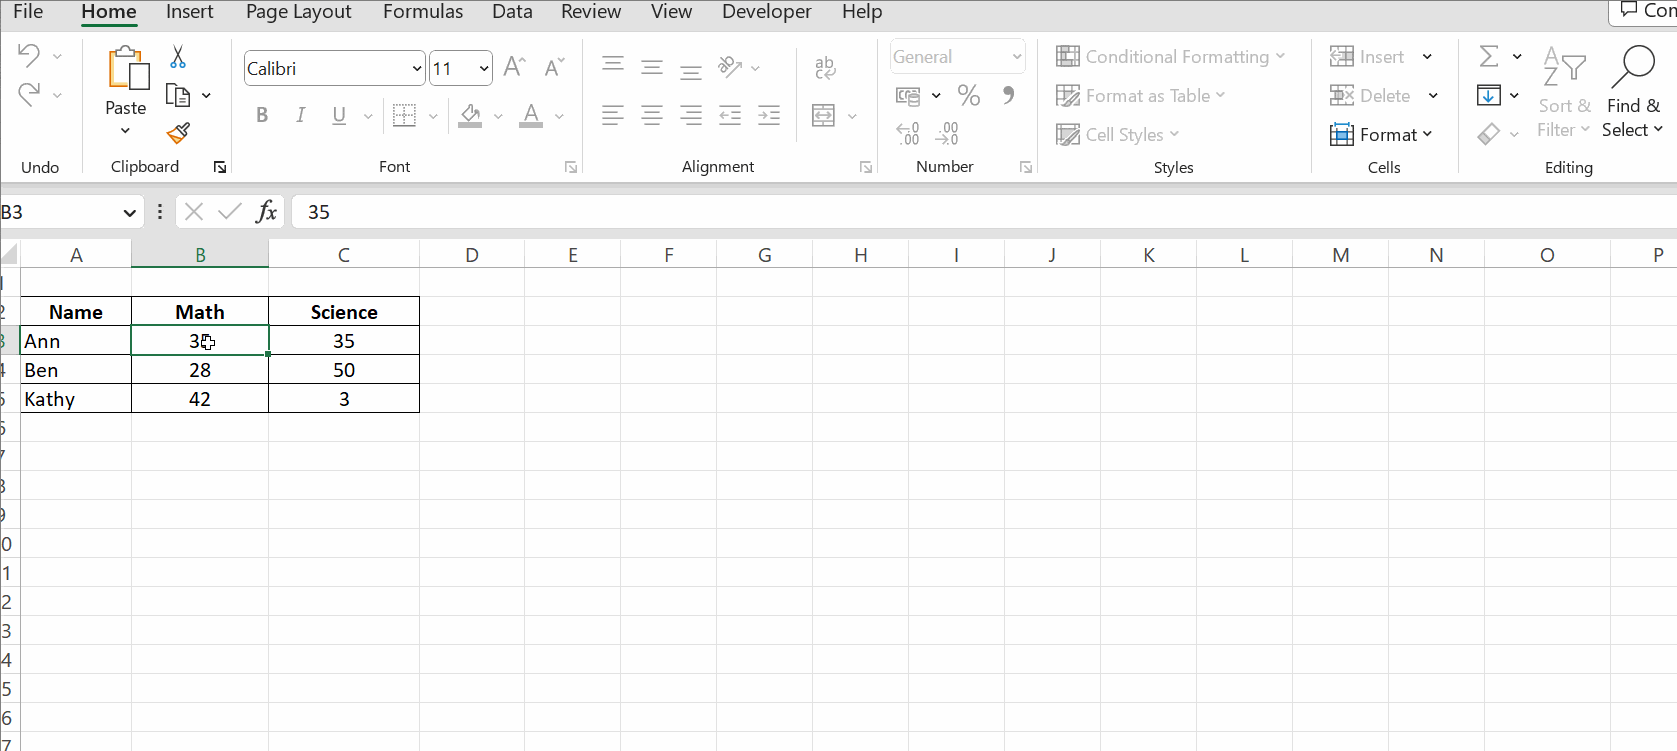 How To Unlock Cells in Excel - Pitman